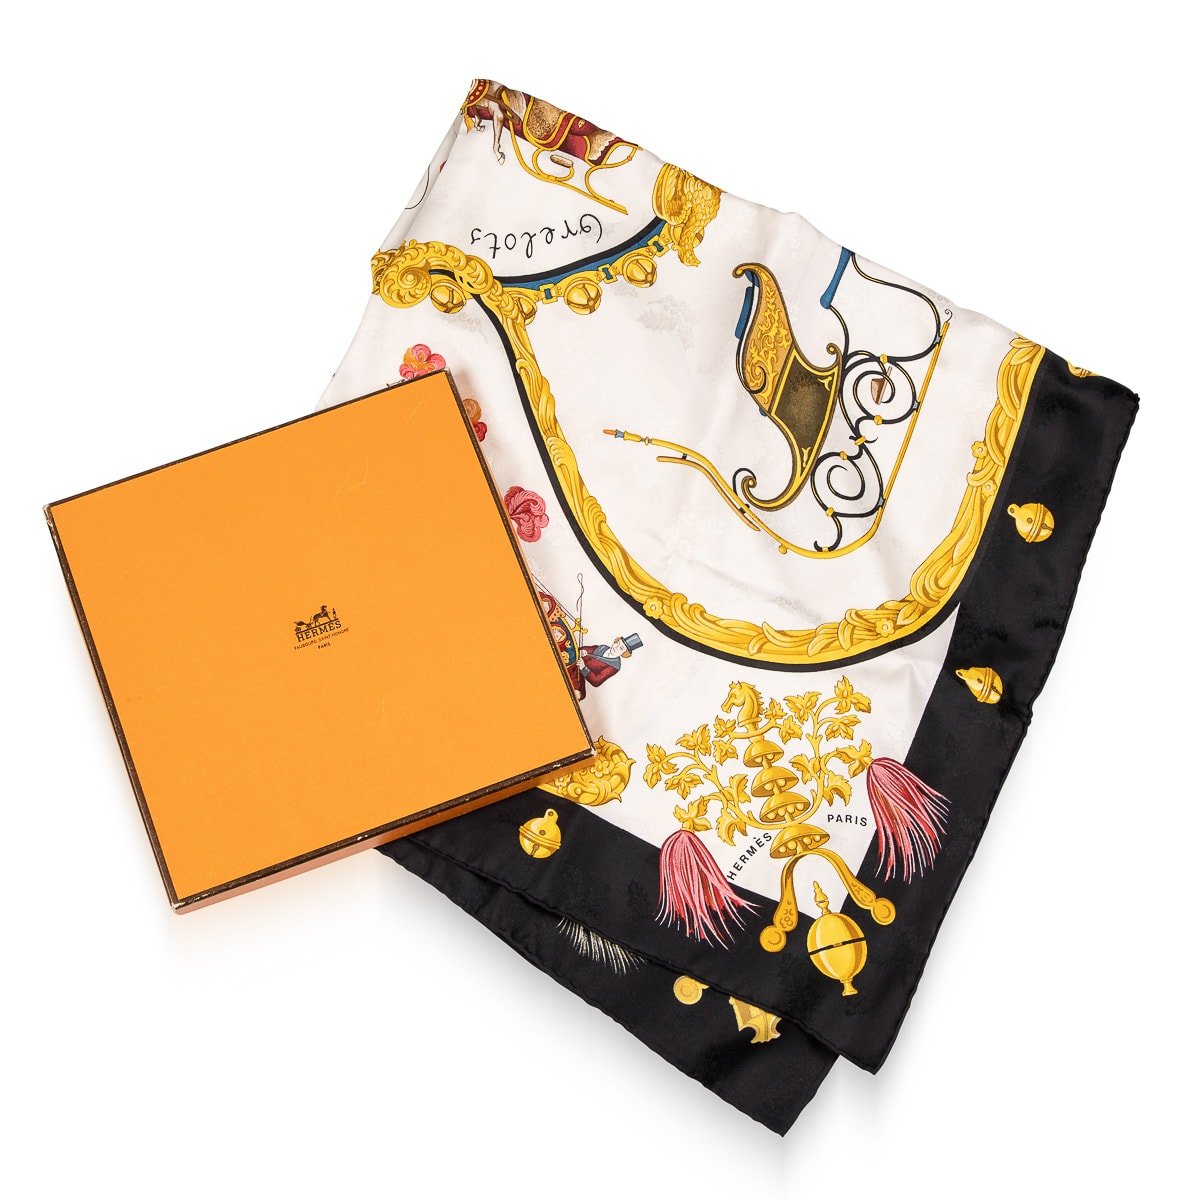 A SILK HERMES SCARF IN THE ORIGINAL BOX - OF RECENT PRODUCTION ...